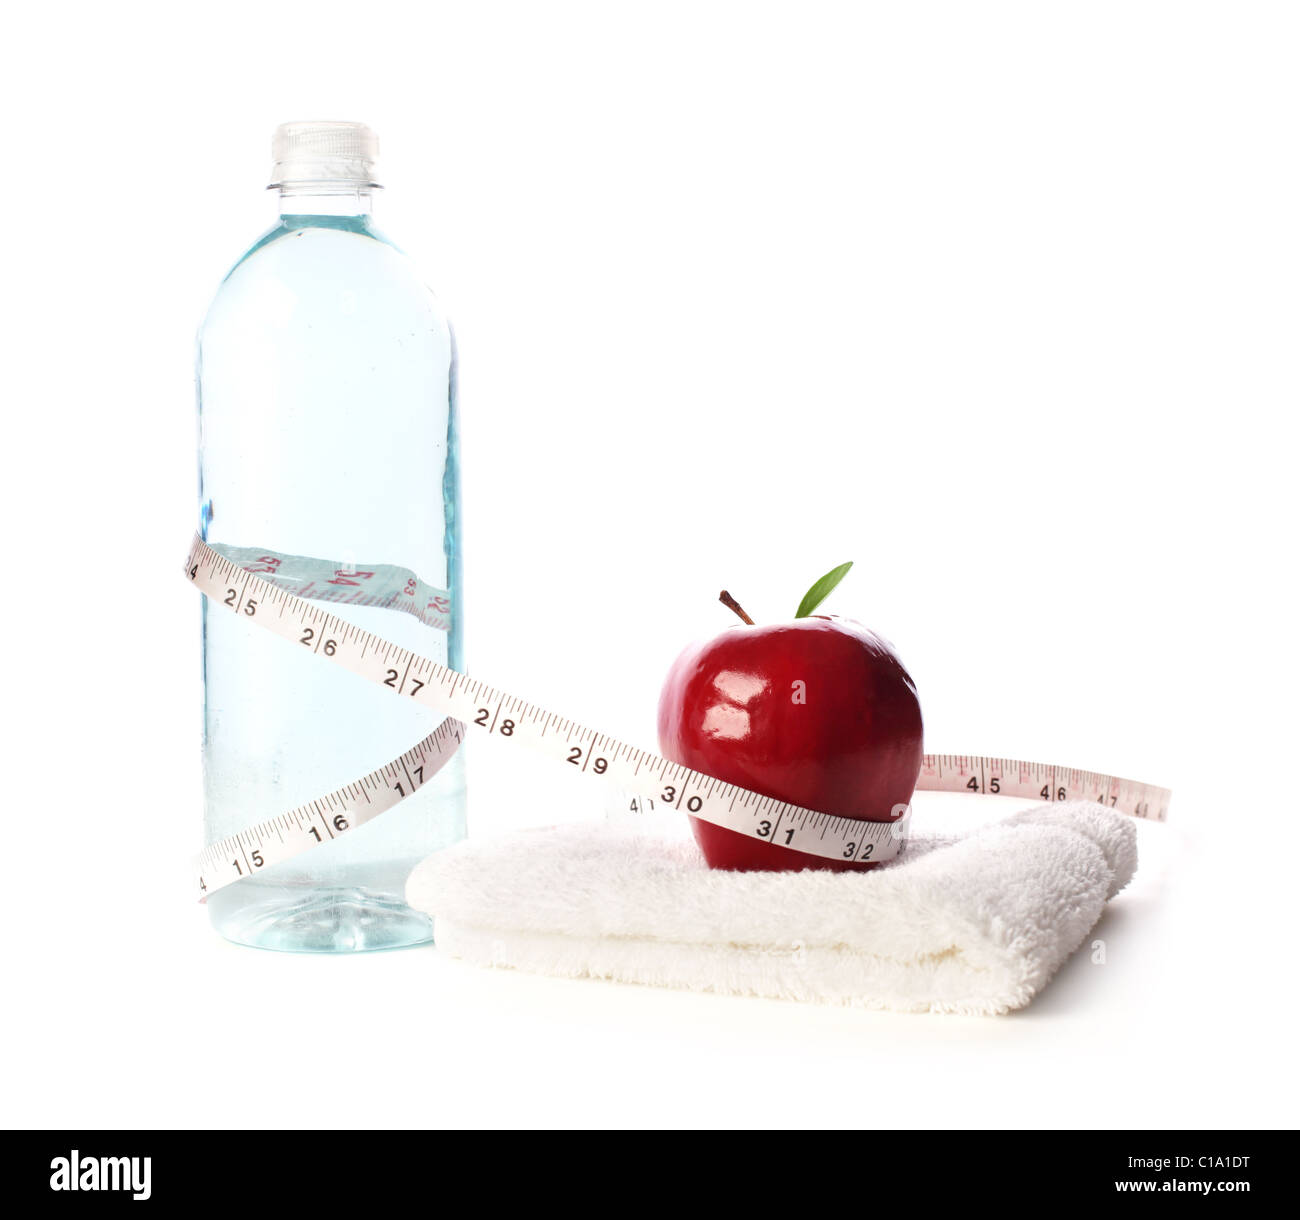 Water bottle with apple and measuring tape Stock Photo